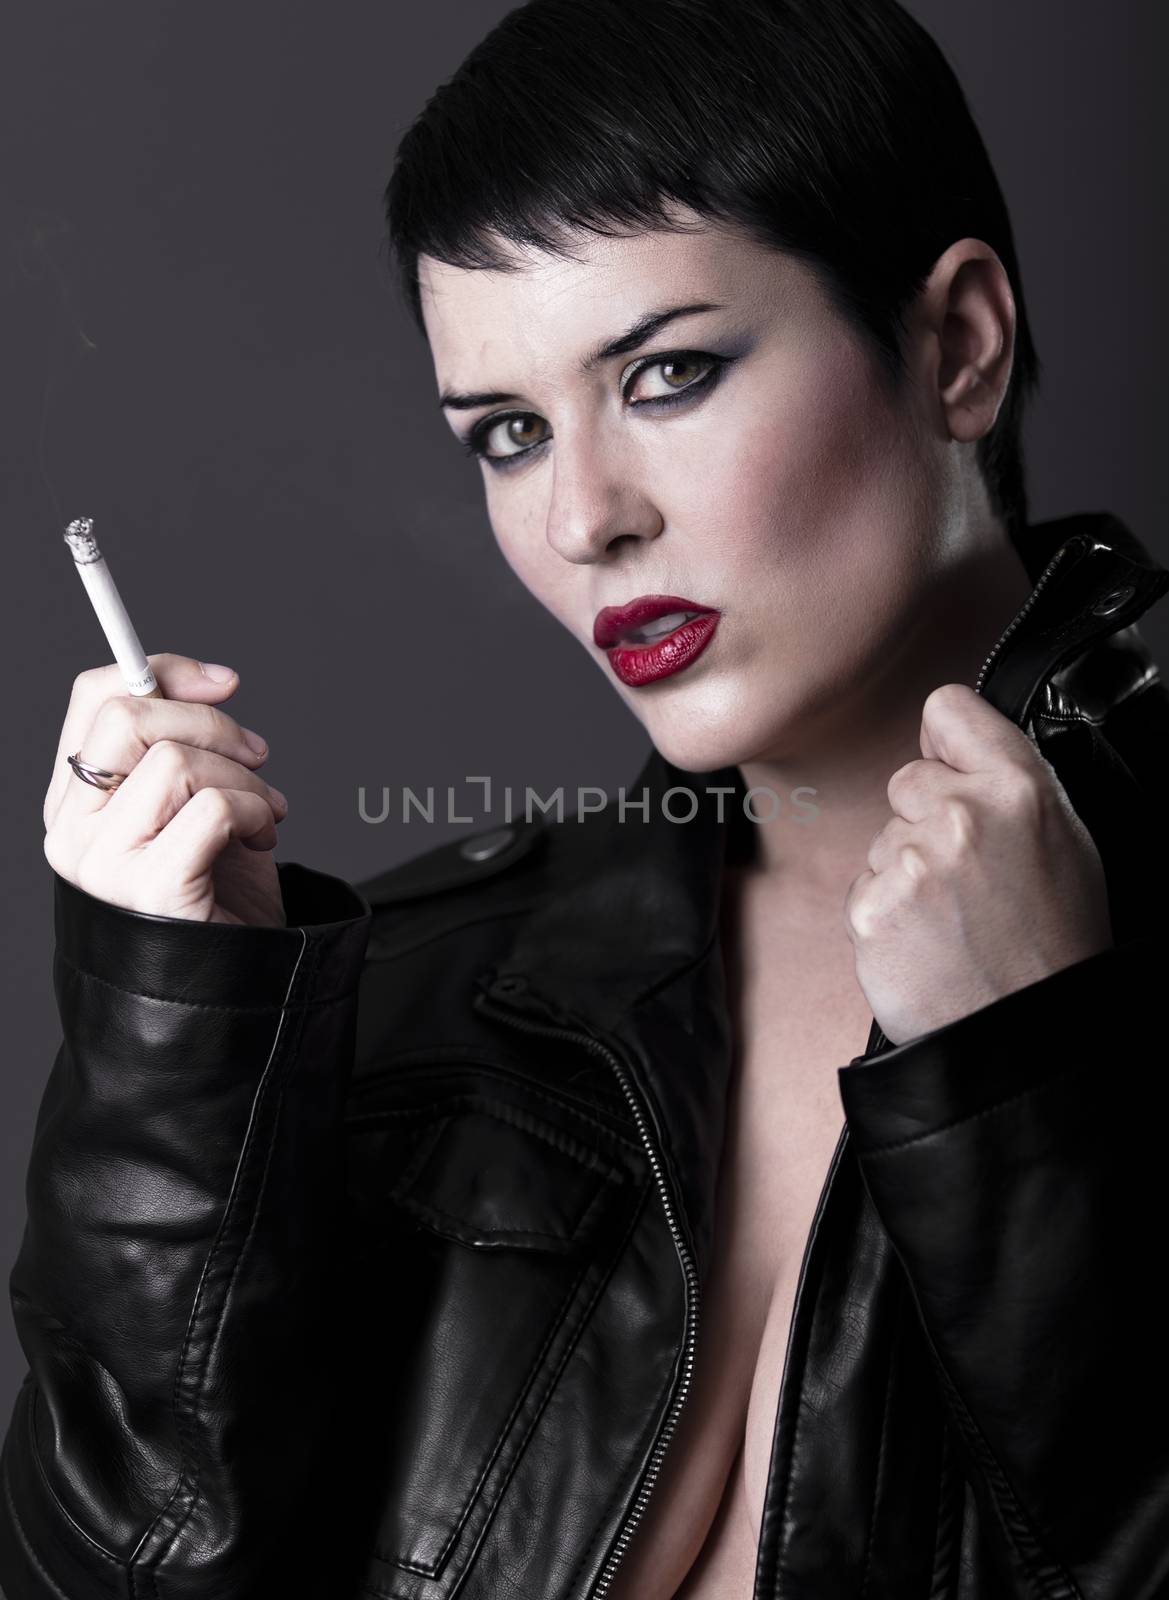 Naked woman with black leather jacket smoking a cigarette by FernandoCortes